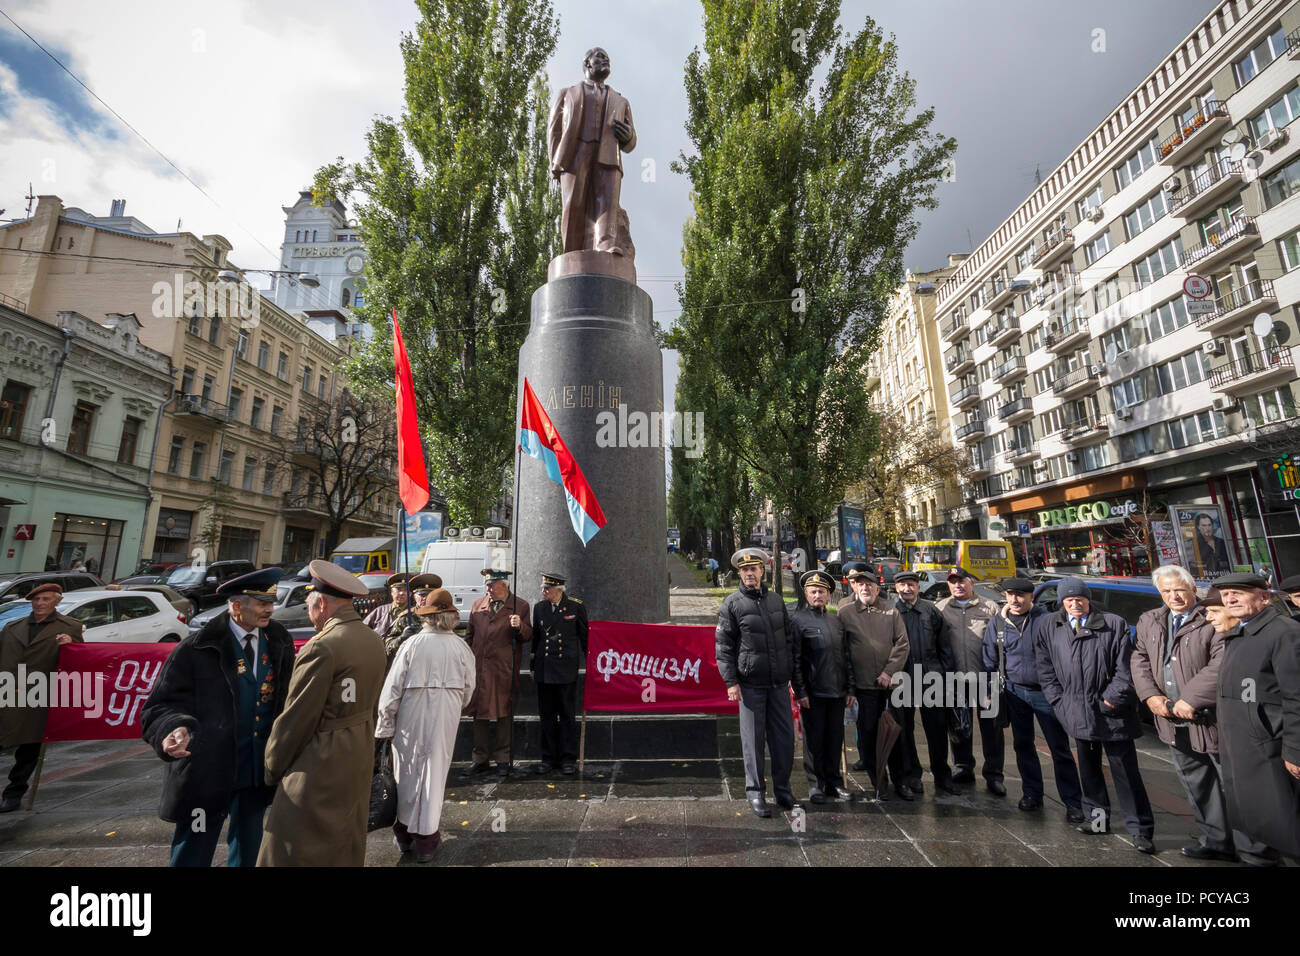 Veterans of the Ukrainian Insurgent Army celebrate their 69th anniversary by Lenin’s monument in Kiev. Stock Photo